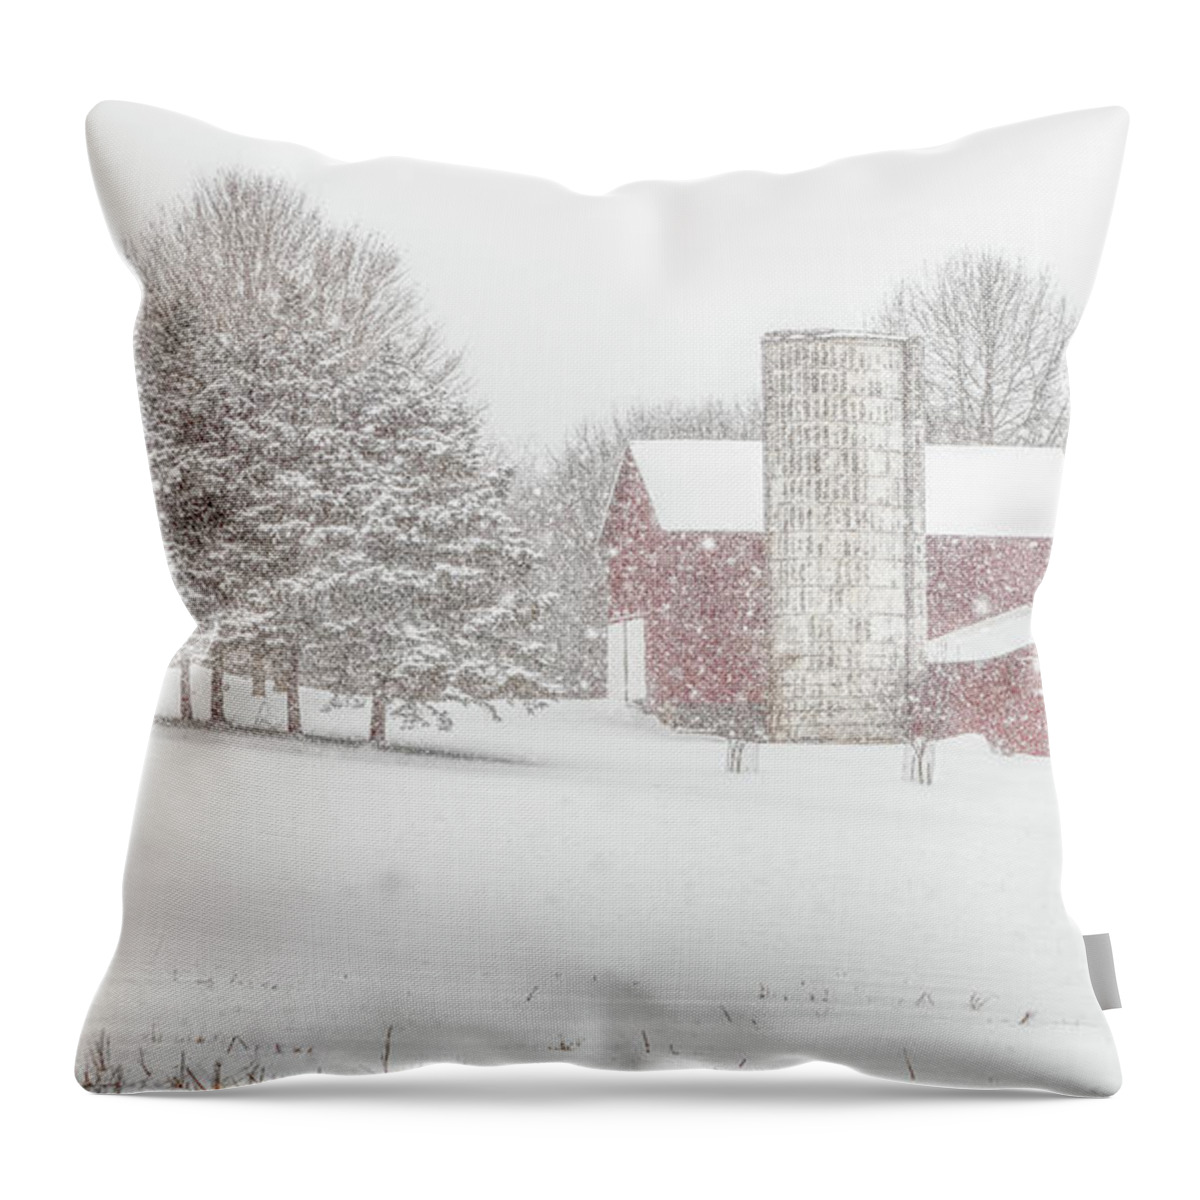 Snowstorm On The Farm Throw Pillow featuring the photograph Winter Wonderland II by Rod Best